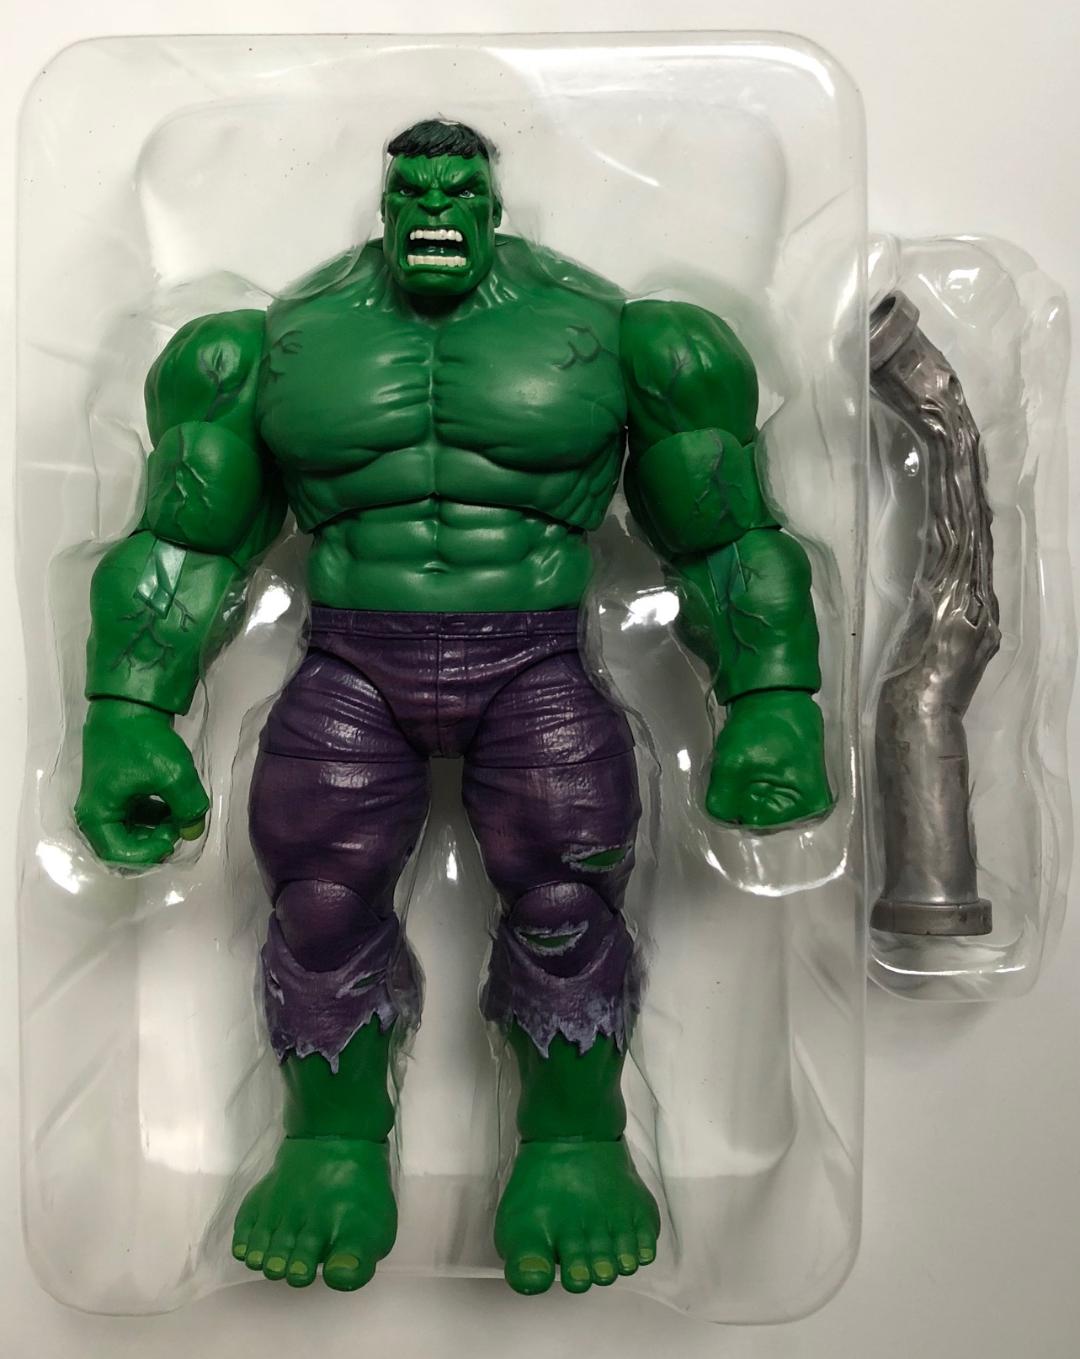 Marvel SDCC 2019 80th Anniversary Retro Hulk Action Figure for sale online 